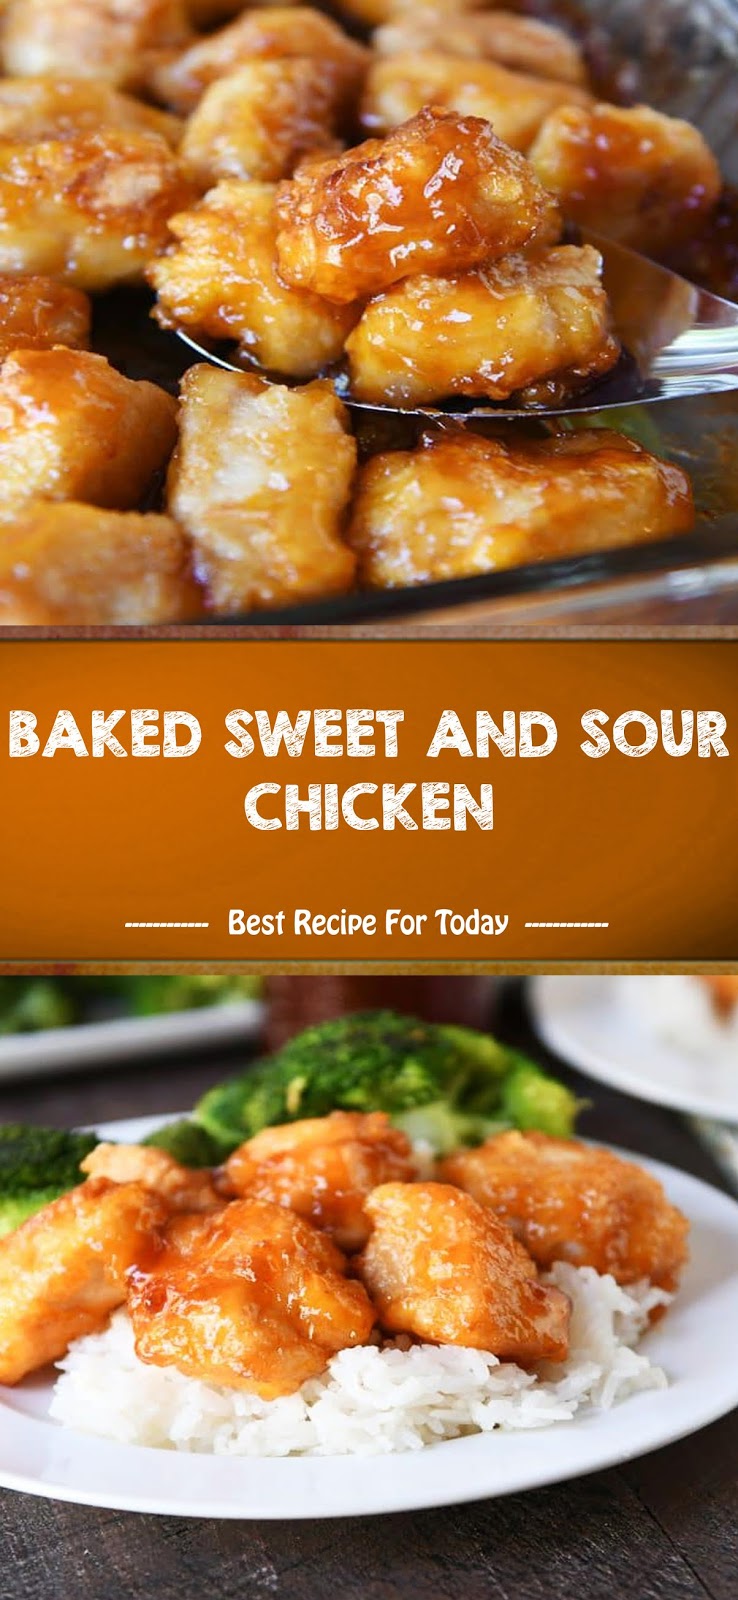 BAKED SWEET AND SOUR CHICKEN - Jolly Lotus